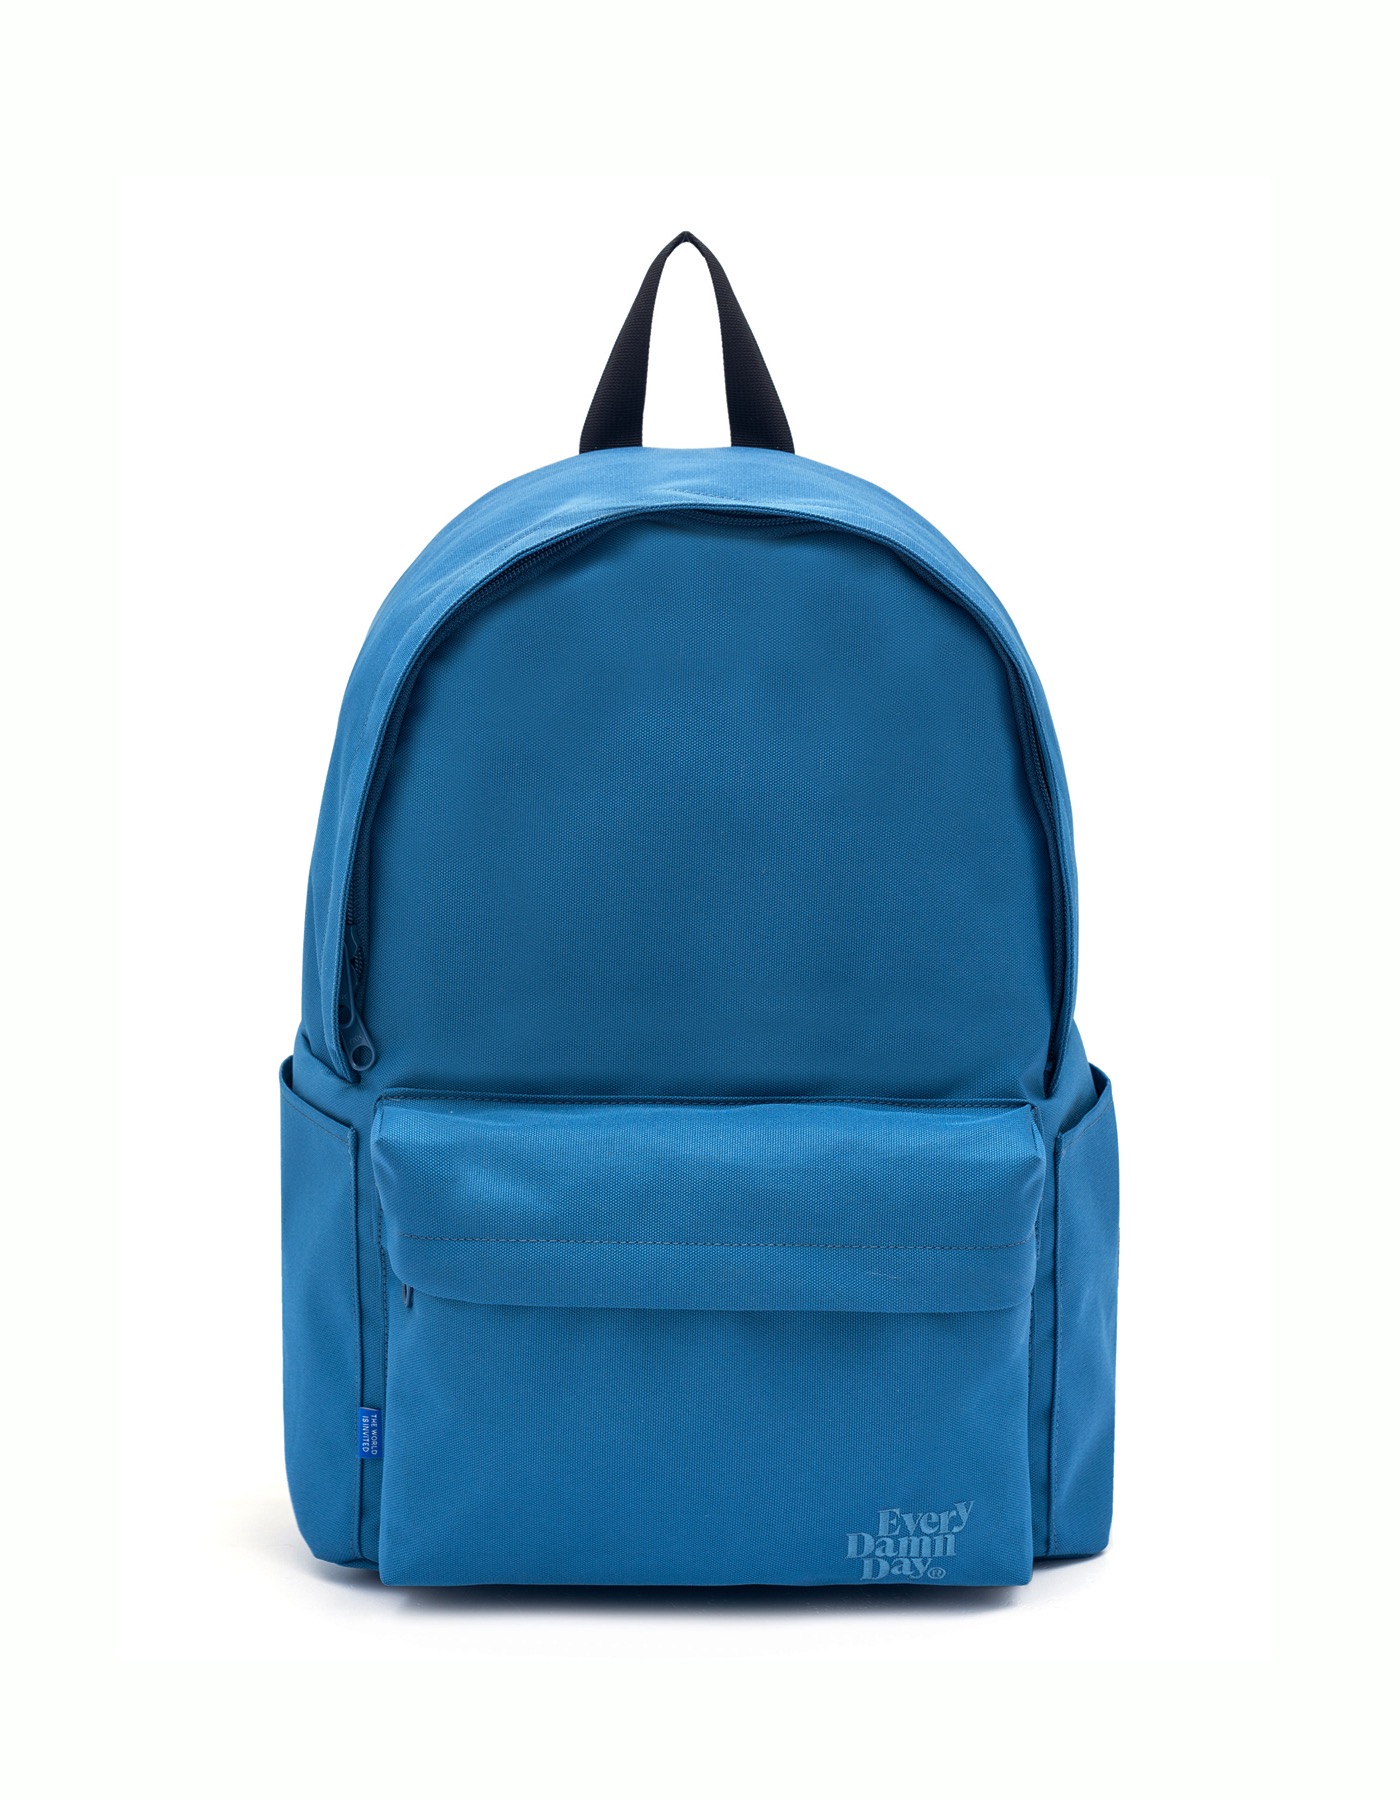 Every Damn Day® Backpack - Blue